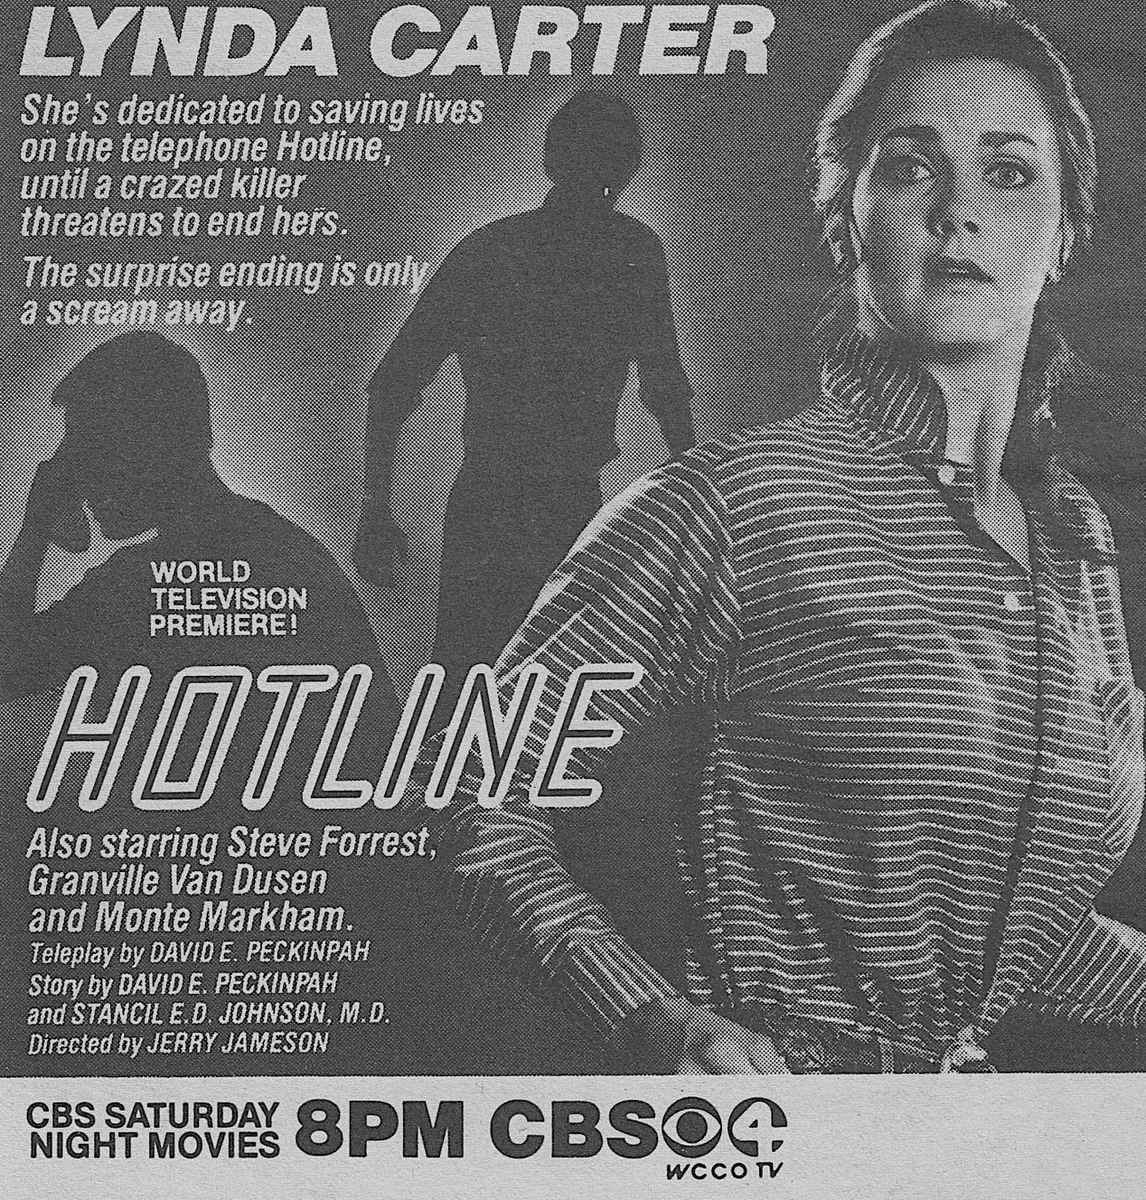 Day 16 of the  #31DaysofTeleterror is all about Hotline, which premiered on CBS on this day in 1982! Lynda Carter plays a helpline volunteer who beings to receive calls from a crazed killer. There's no Final Girl transformation here. Carter starts strong. Stays strong. (1/2)